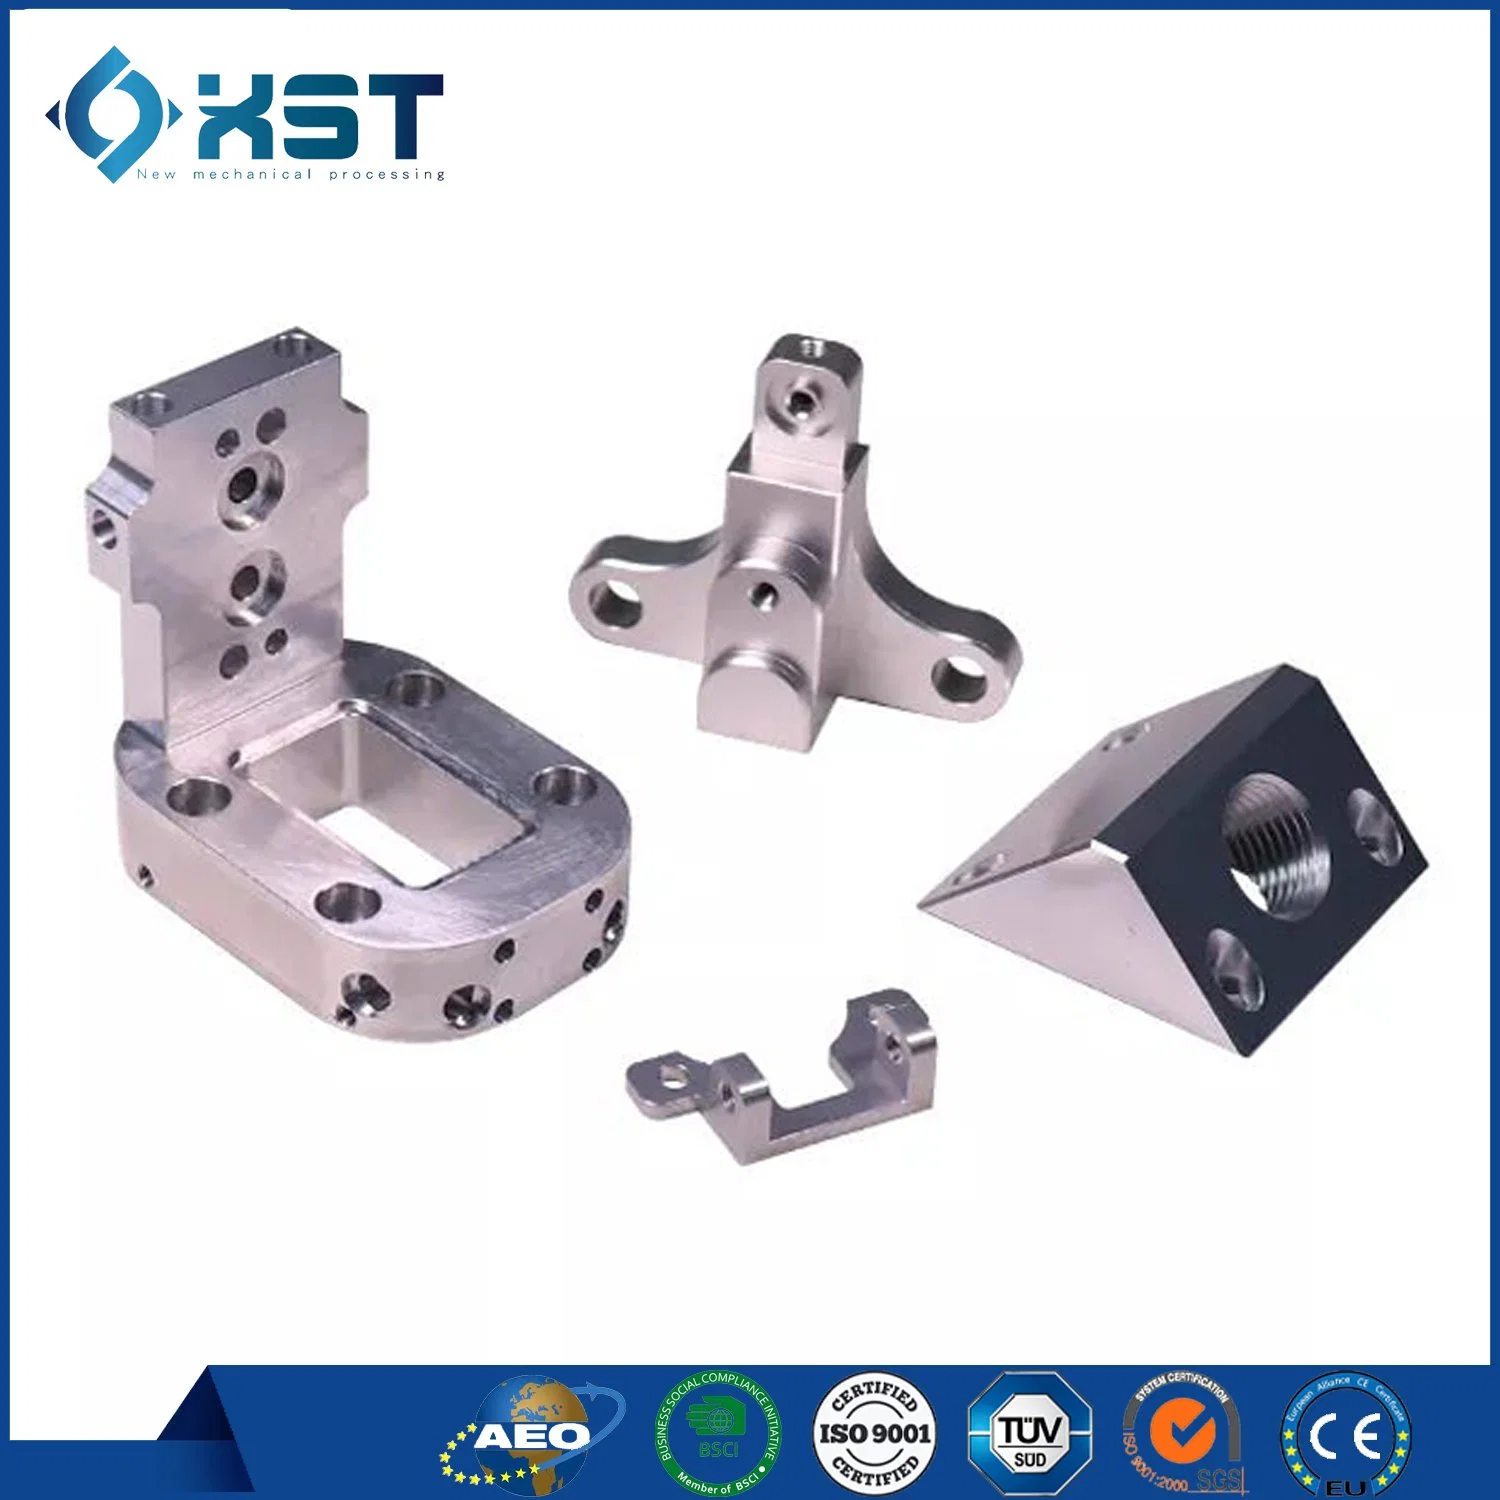 OEM Professional Manufacturers Metal Fabrication Milling and Turning Processing Aluminum CNC Machining Services